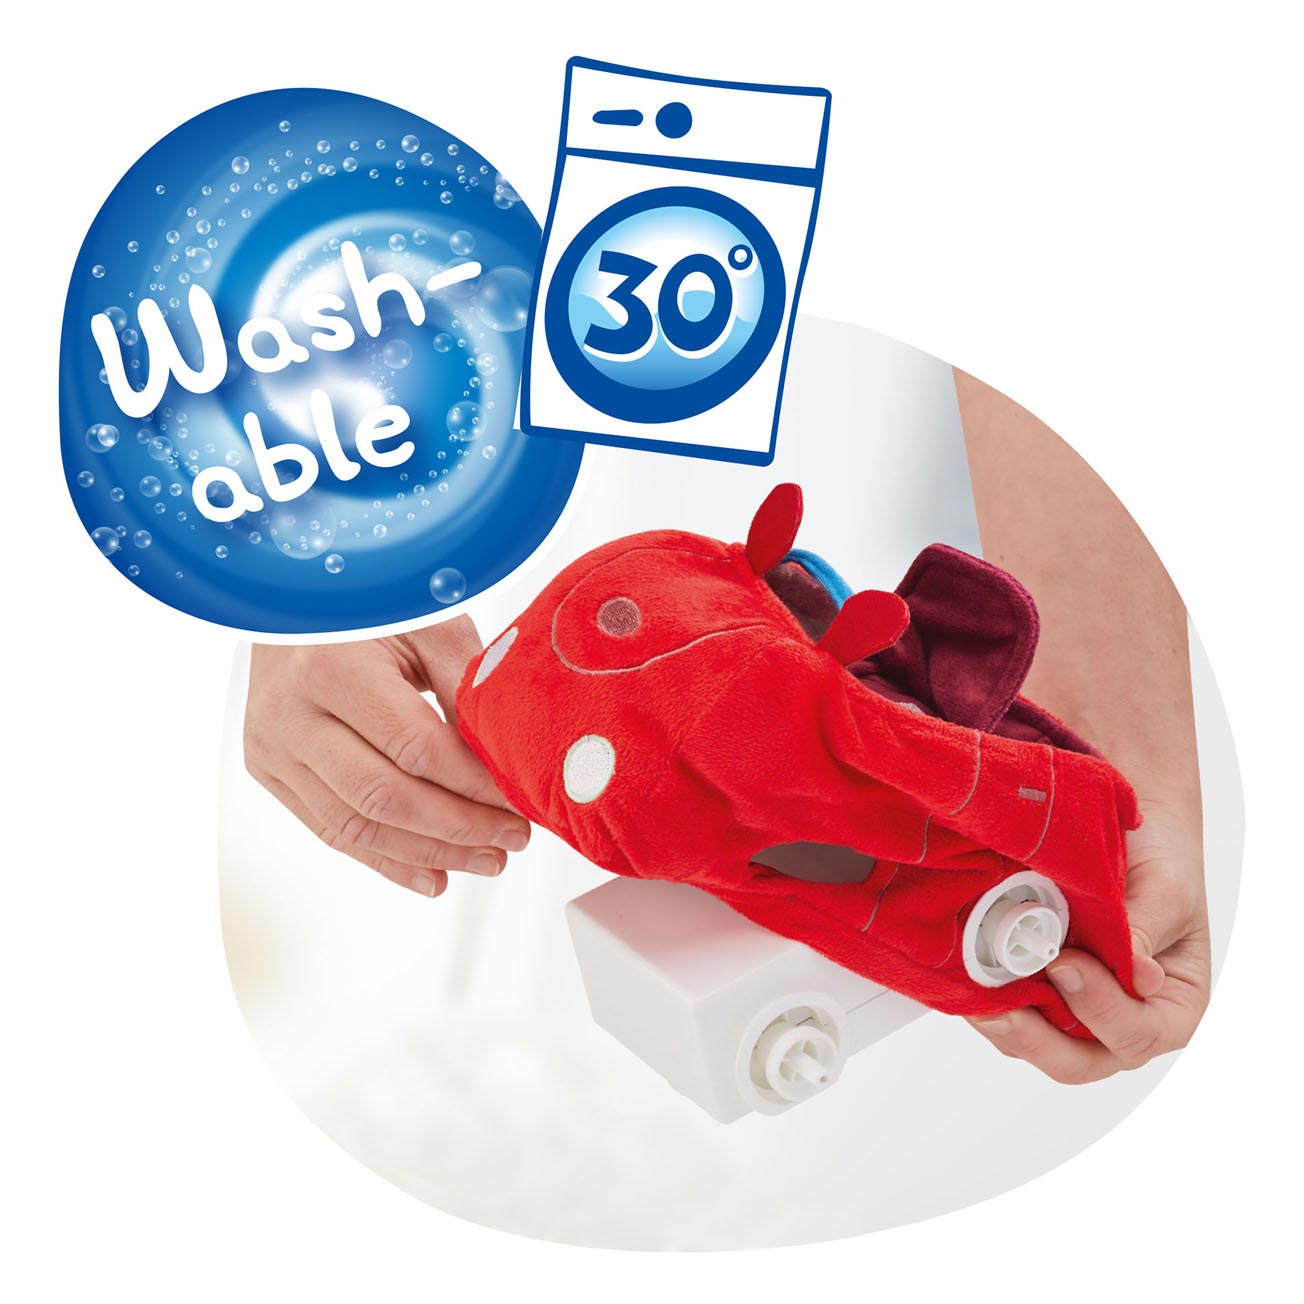 Revell Mein erstes RC-Auto – Peppa Pig